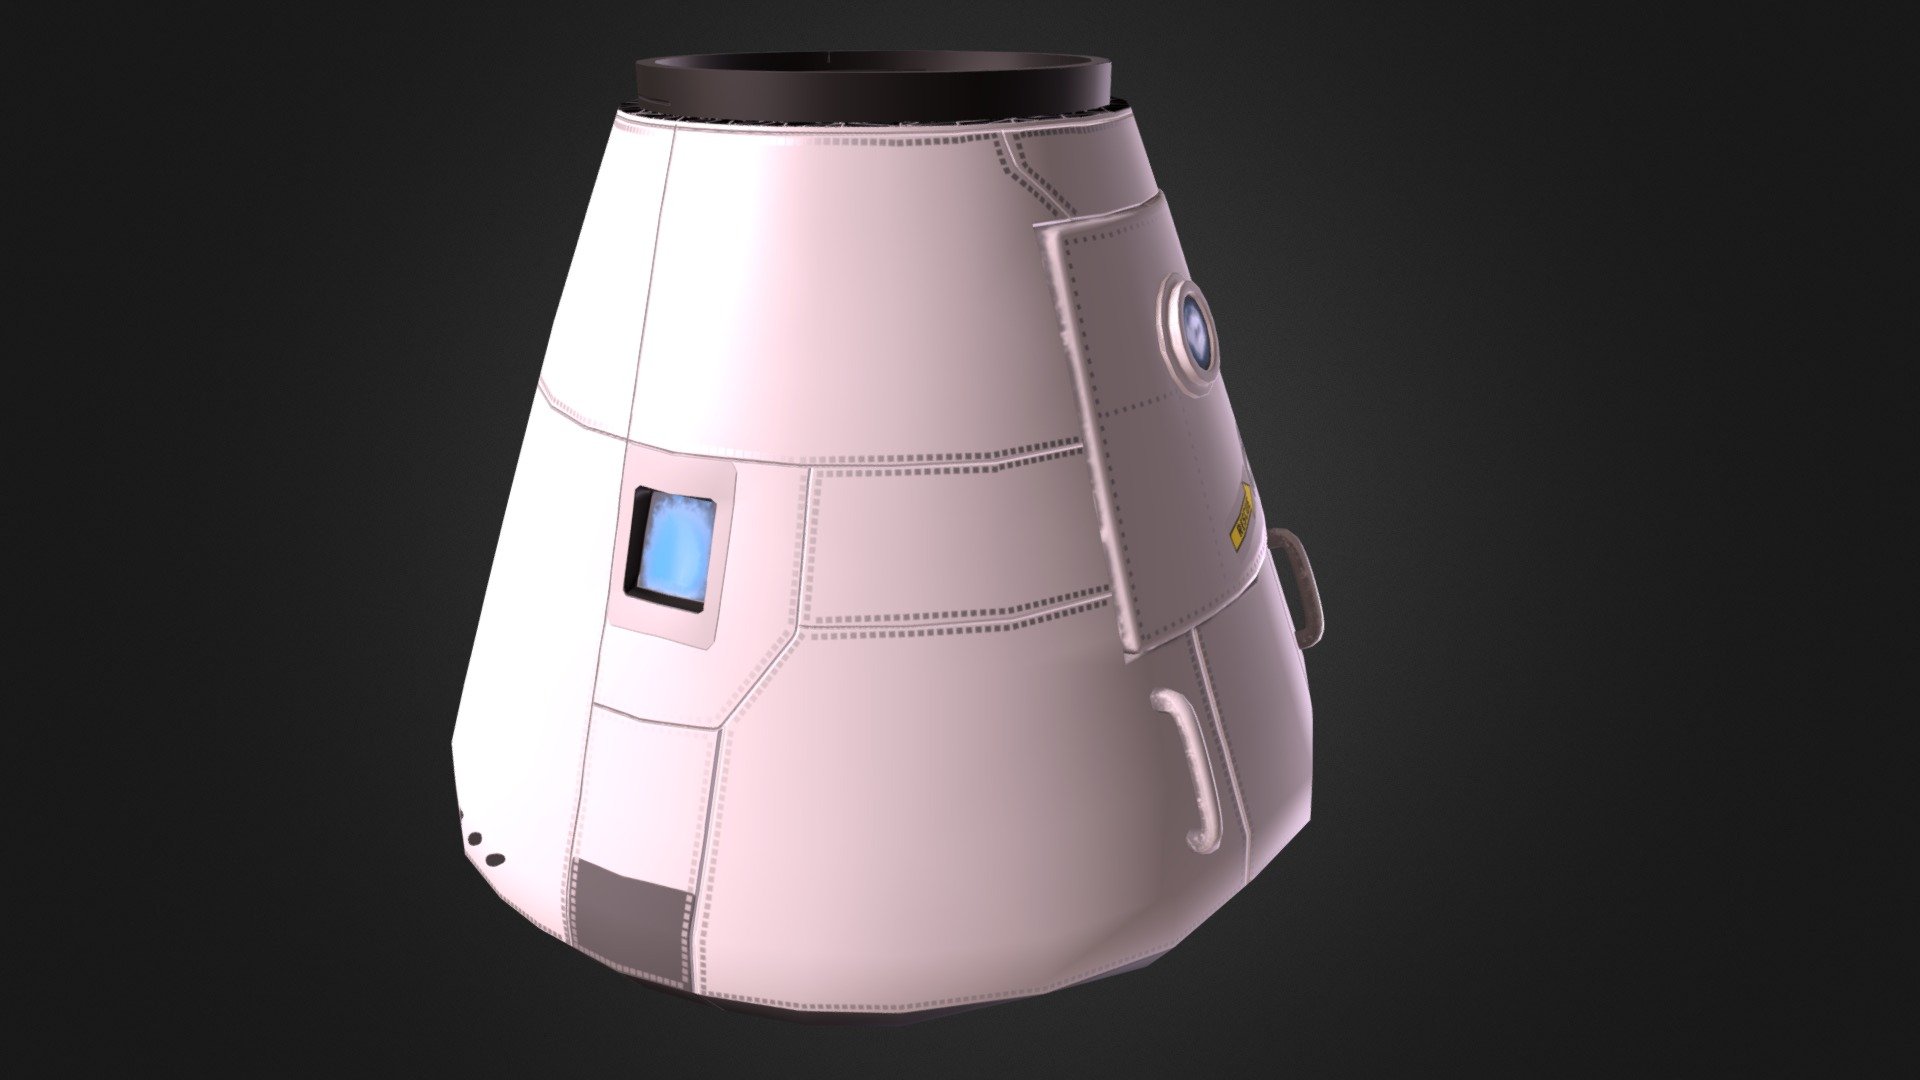 Body of SAT03 modelPiece

Asset for undisclosed VR game

Lowpoly

KSP inspired - SAT03 Space capsule - Download Free 3D model by Hodisfut 3d model